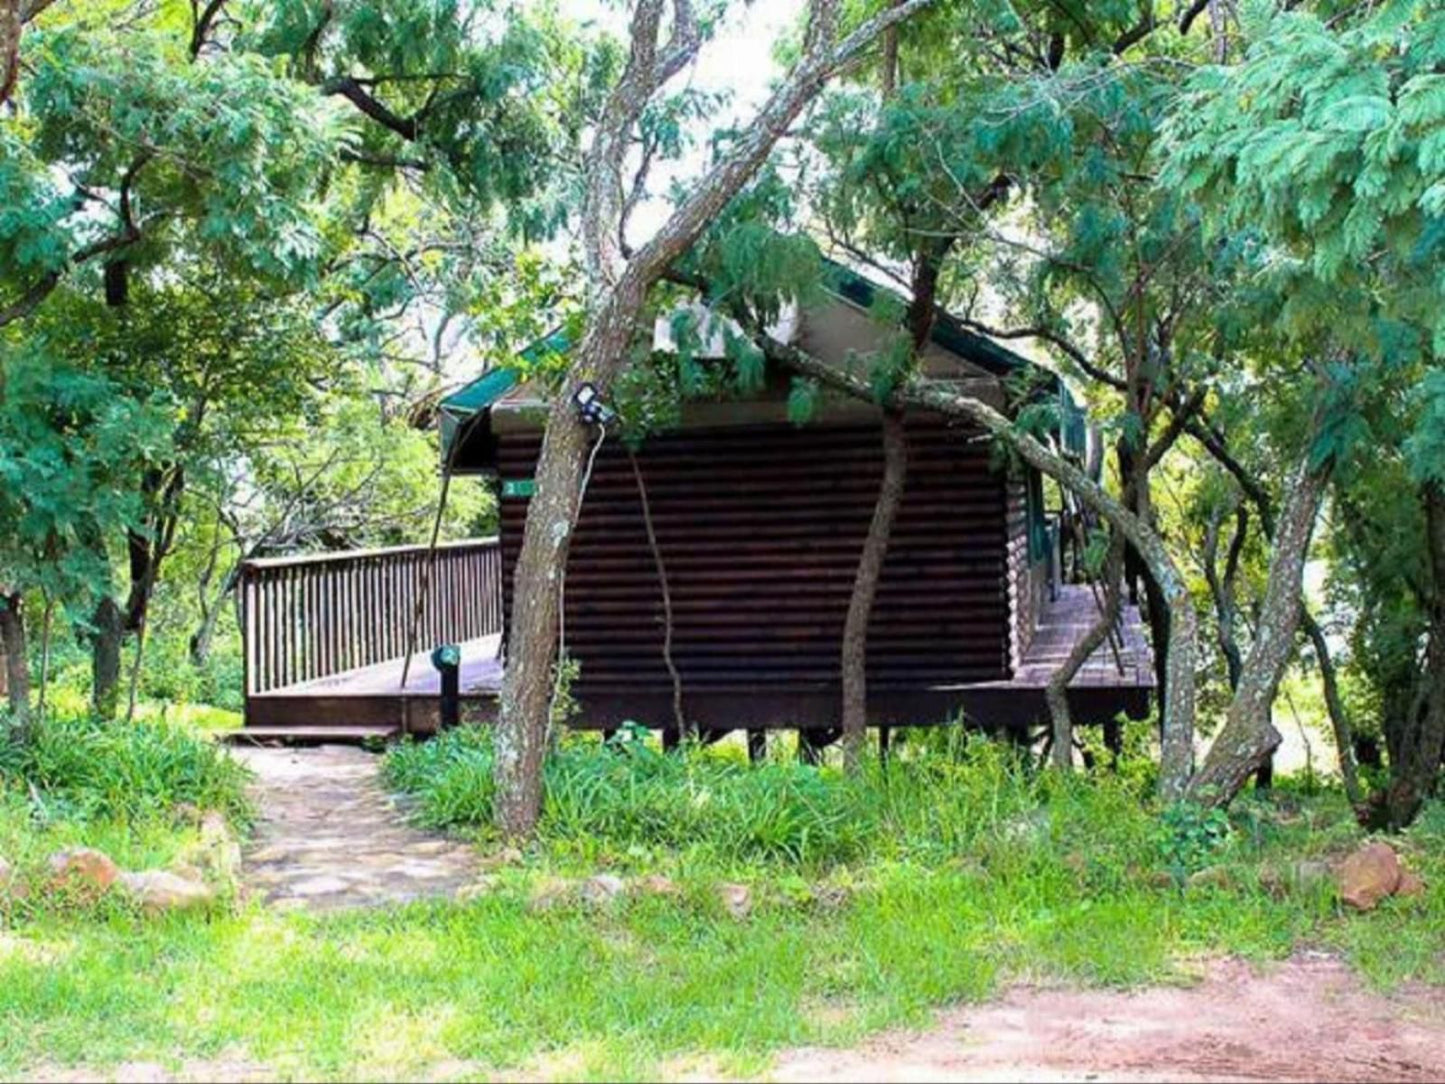 Valley Of The Rainbow Estate Dullstroom Mpumalanga South Africa Cabin, Building, Architecture, Tree, Plant, Nature, Wood